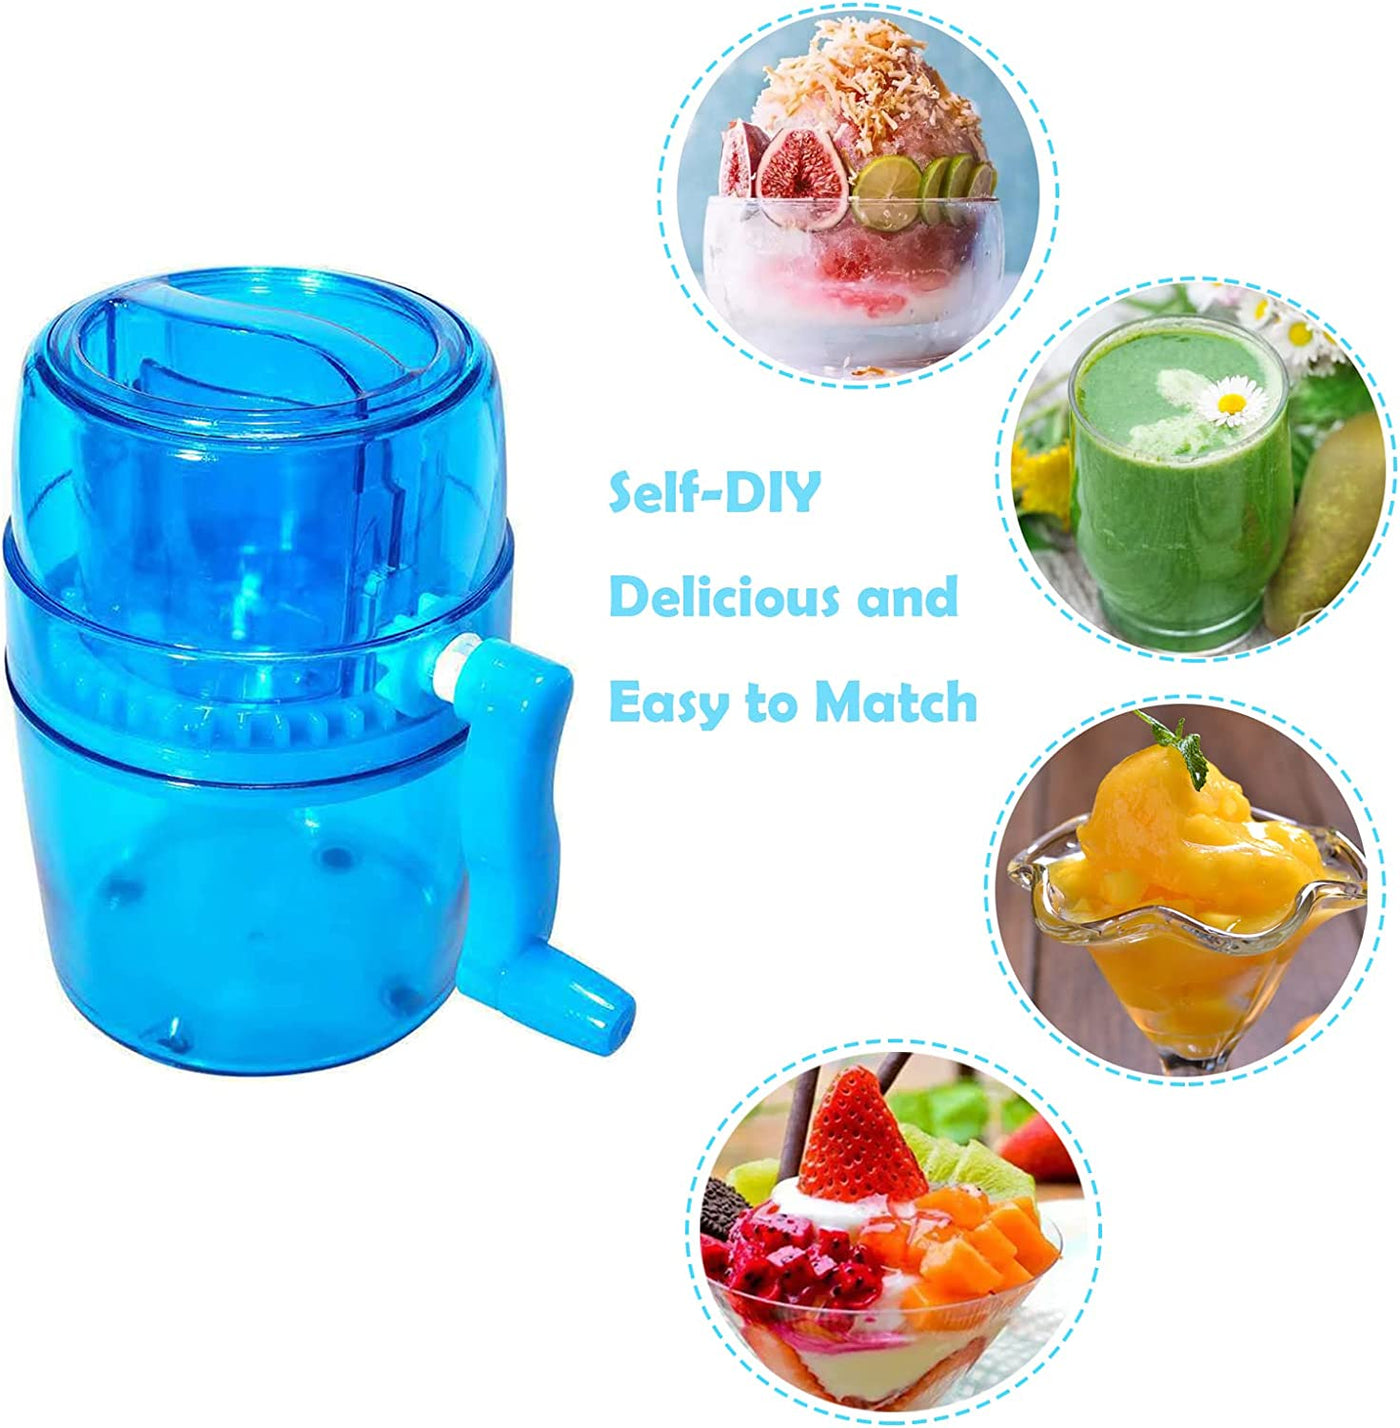 Hand-operated Portable Ice Shaver and Manual Hand Crank Ice Crusher, Snow Cone Machine and Ice Grinding Machine with Free Ice Trays, Shaved or Fine Chips Snow Cones or Slushies